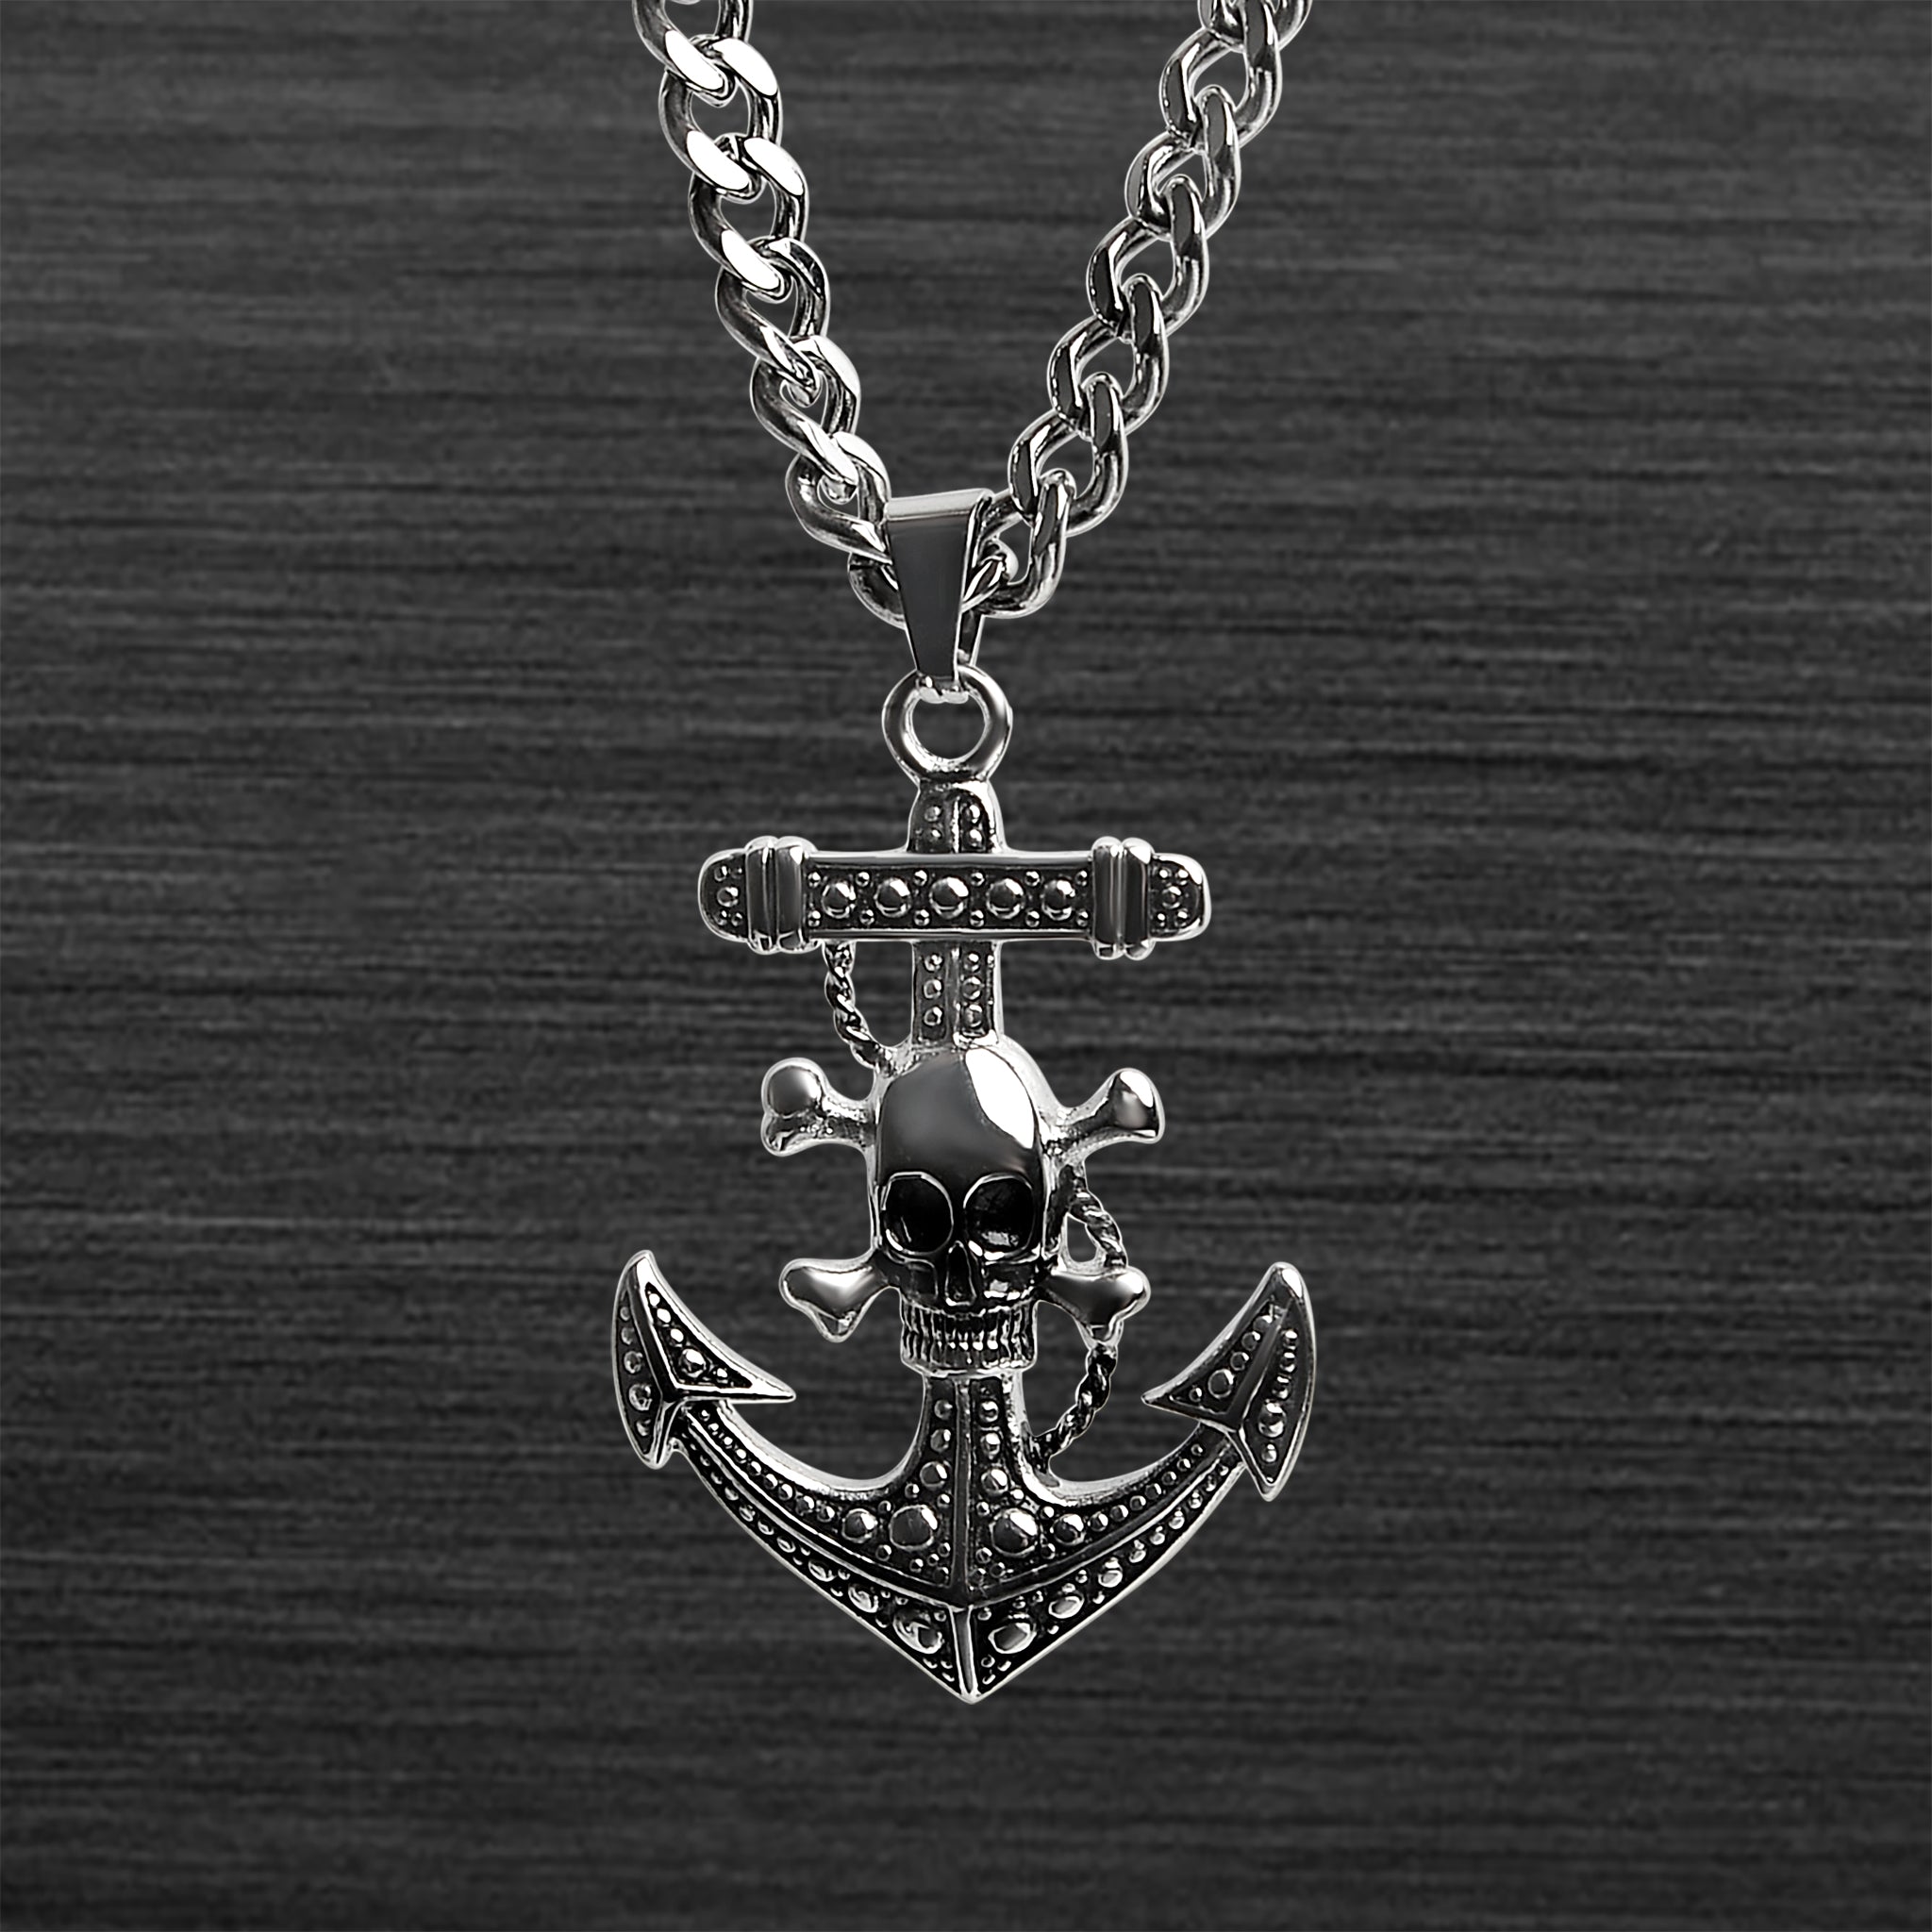 Stainless Steel SKULL And Crossbones On Anchor Rope Chain Necklace / PDC0179-RTL